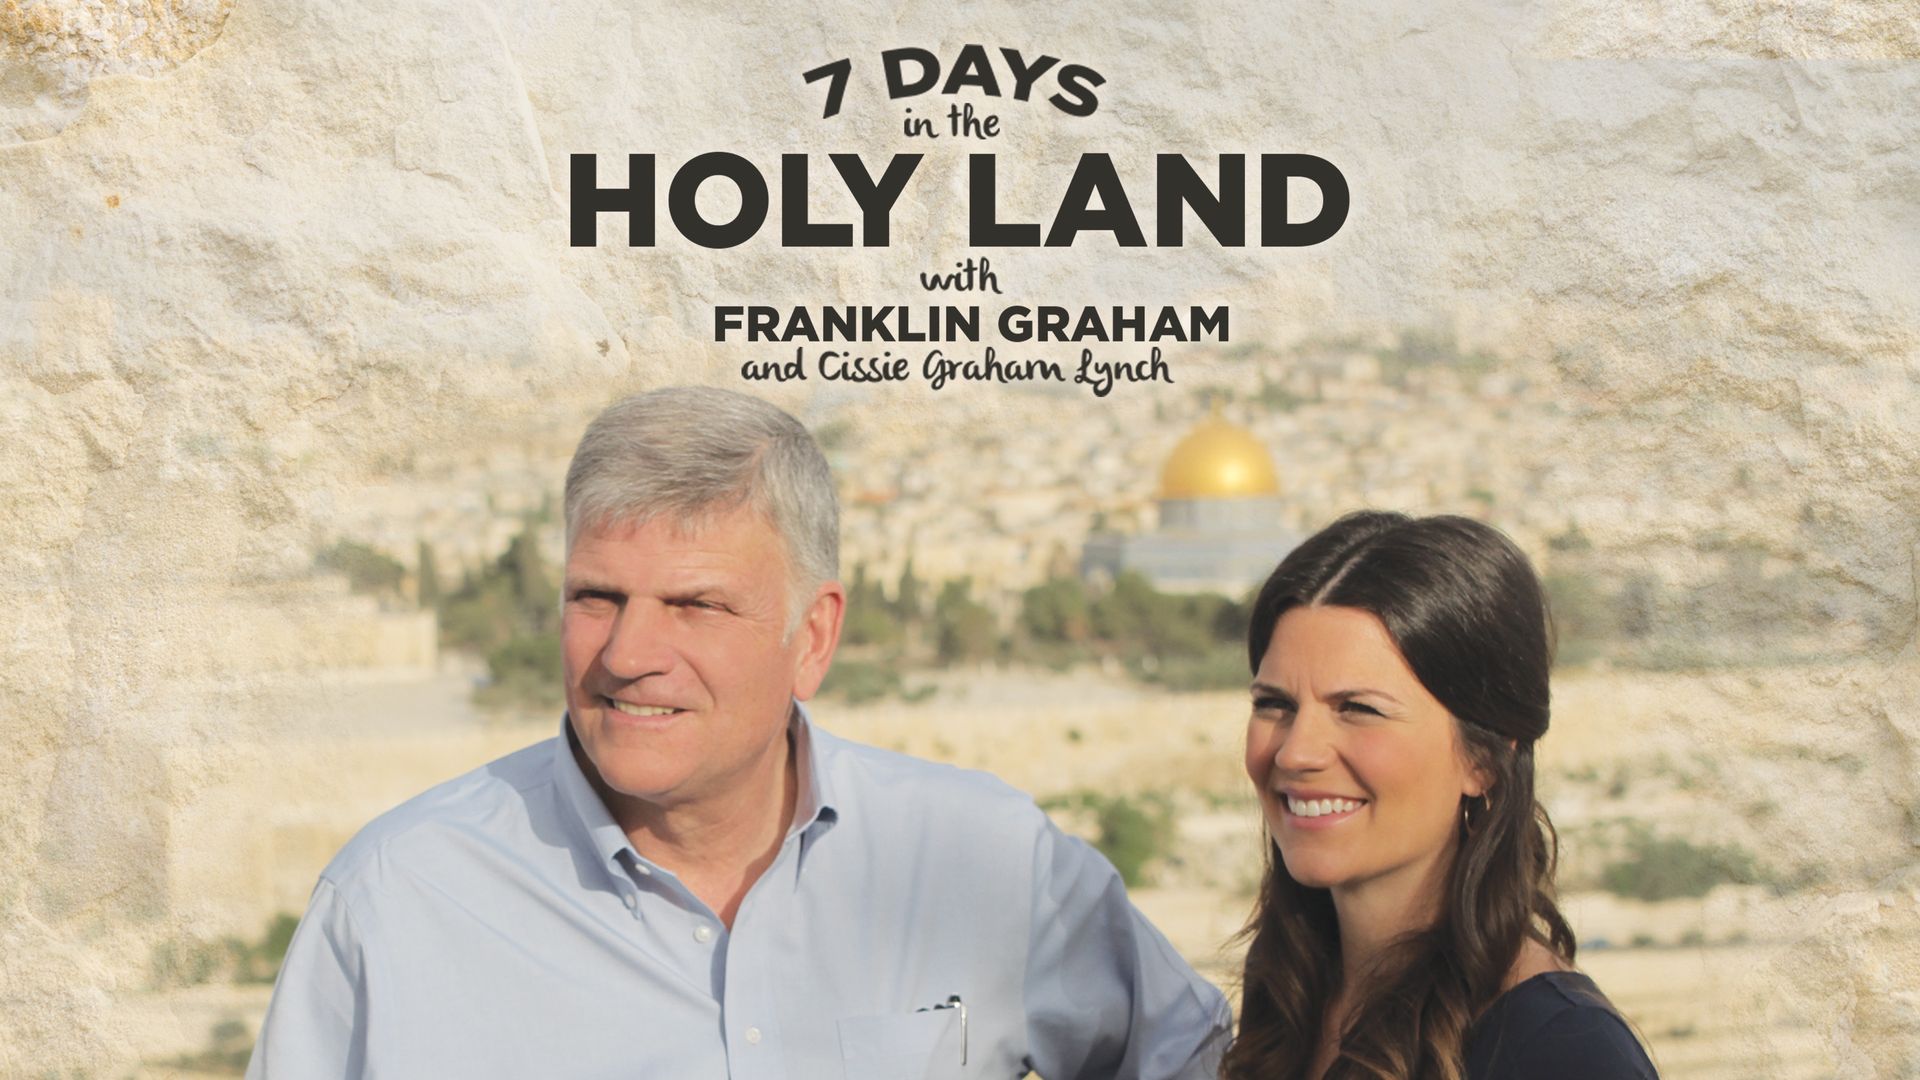 7 Days in the Holy Land Backdrop